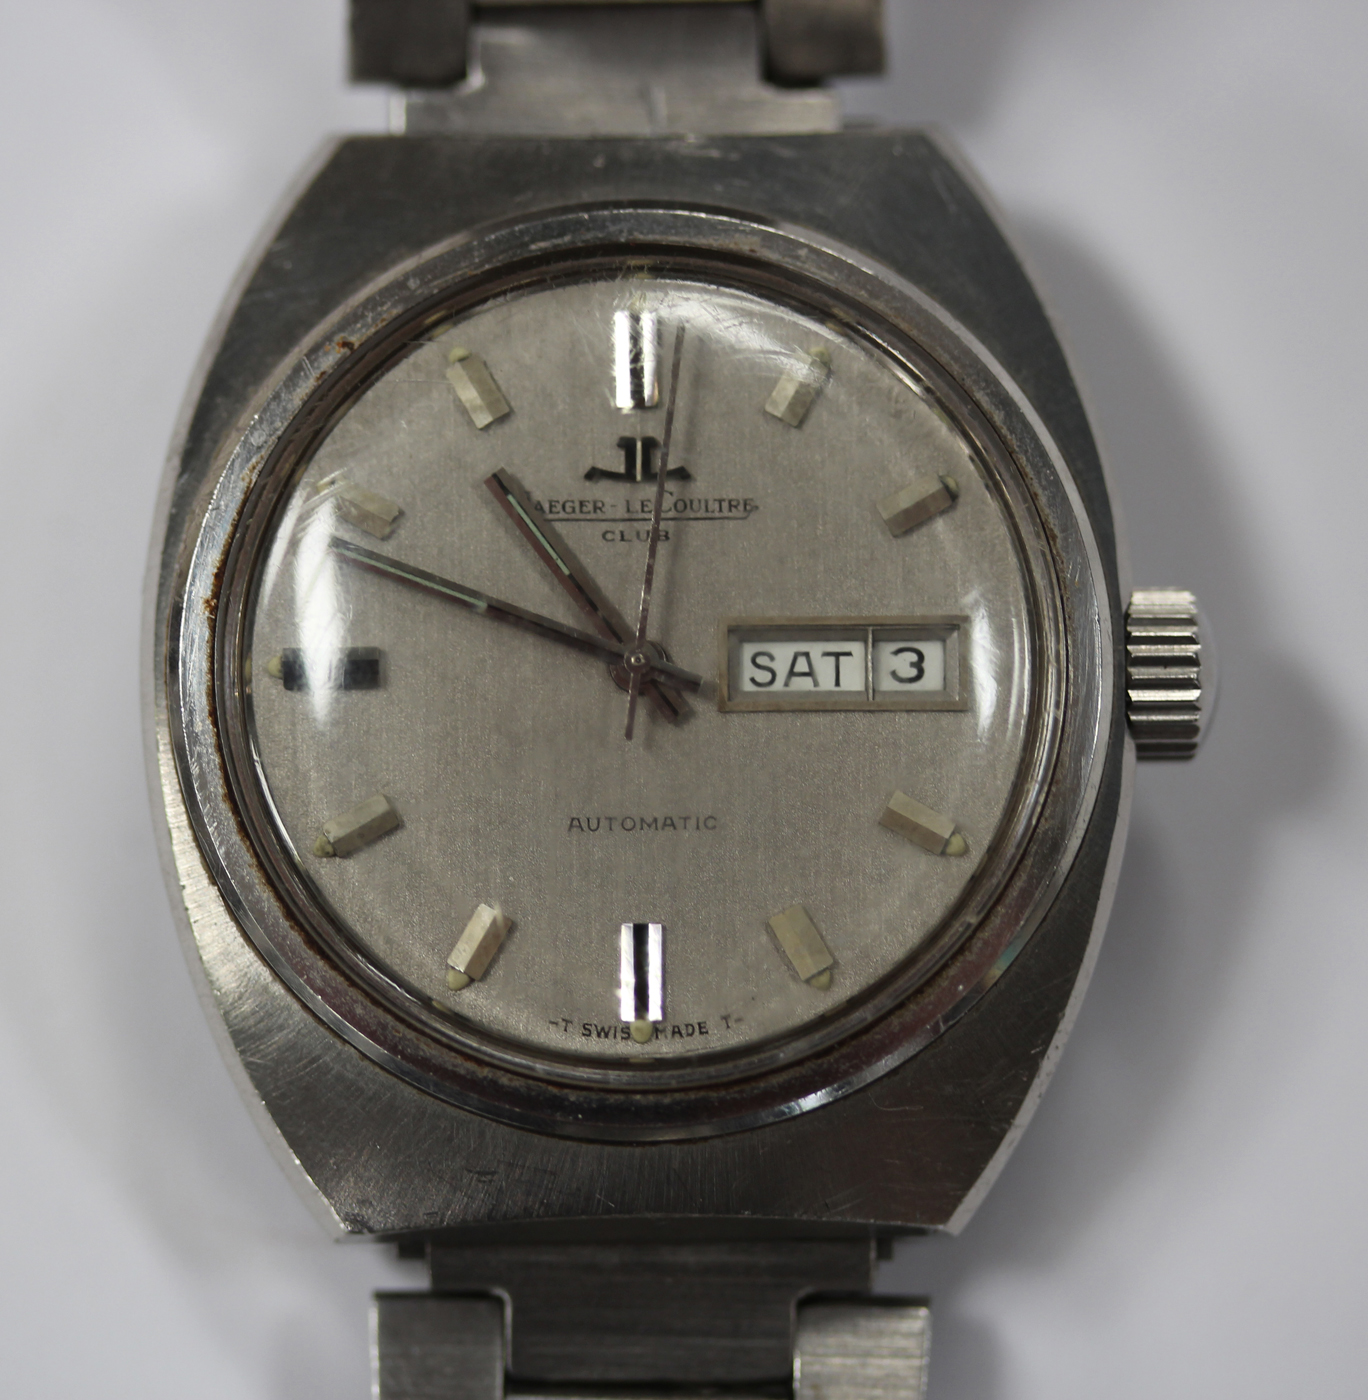 1970s Jaeger-LeCoultre Club Automatic | lupon.gov.ph